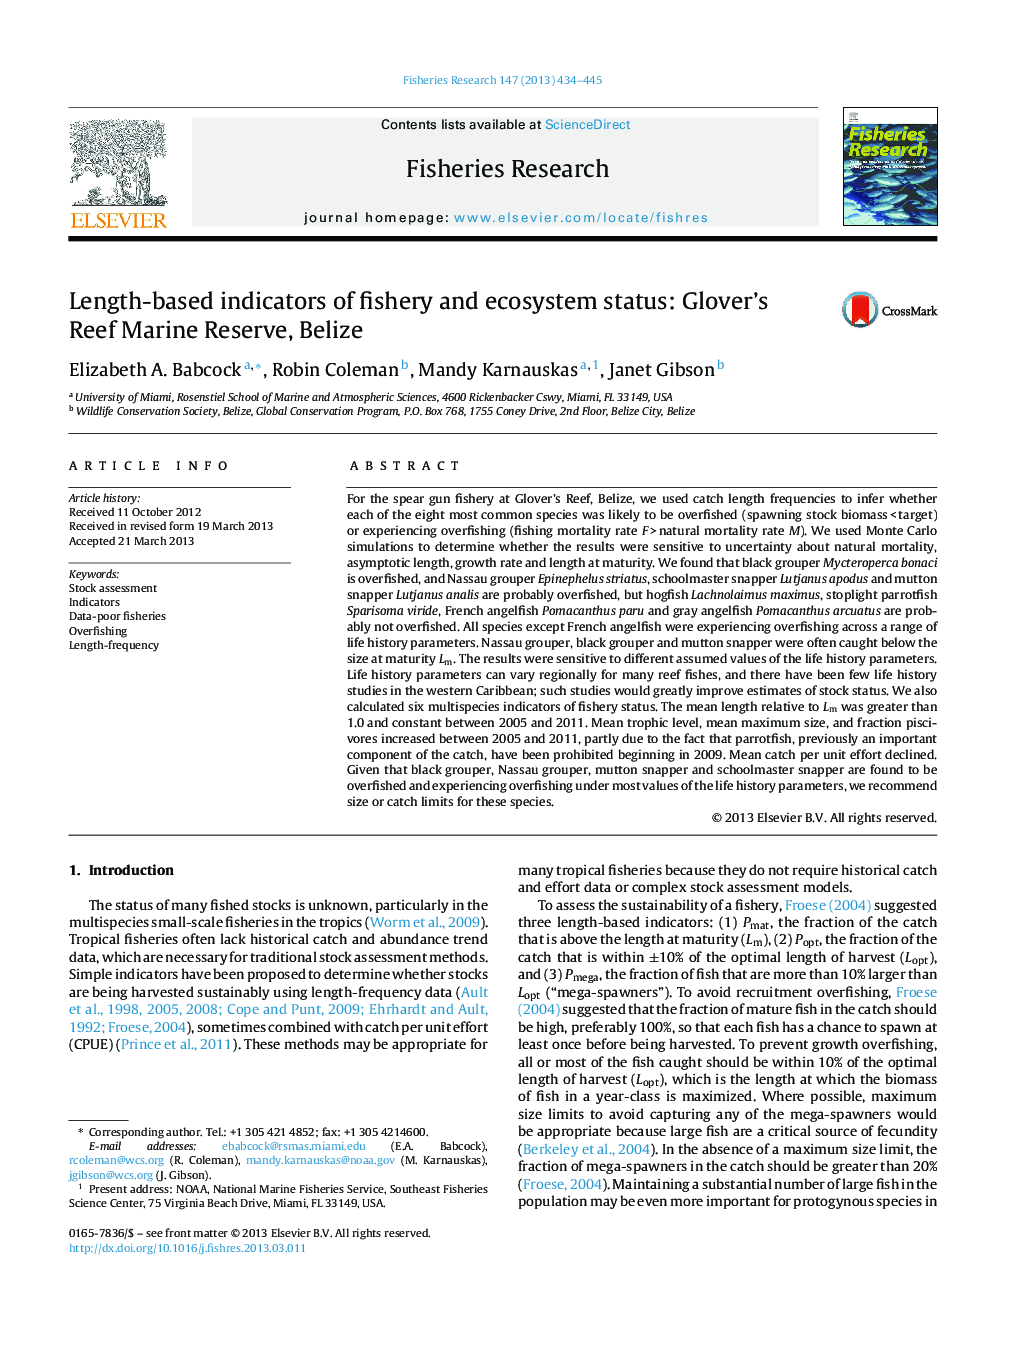 Length-based indicators of fishery and ecosystem status: Glover's Reef Marine Reserve, Belize